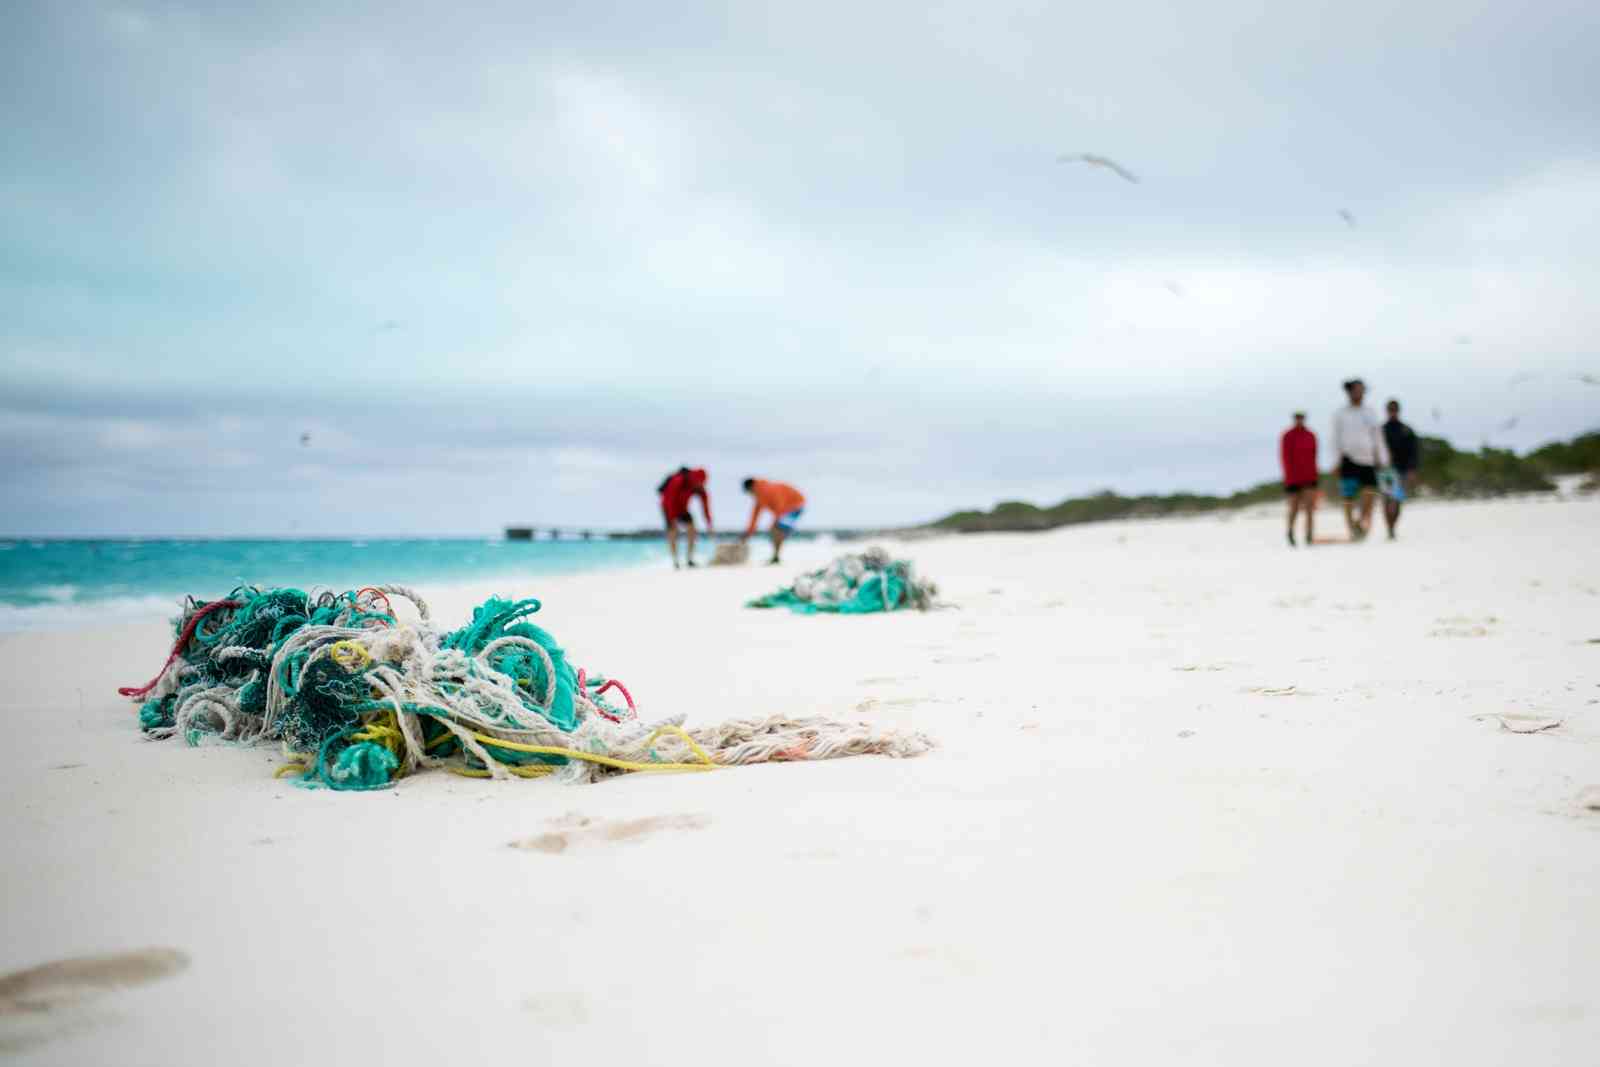 Tangled Nets on a beach in Hawaii - NOAA Coral Reef Ecosystem Program